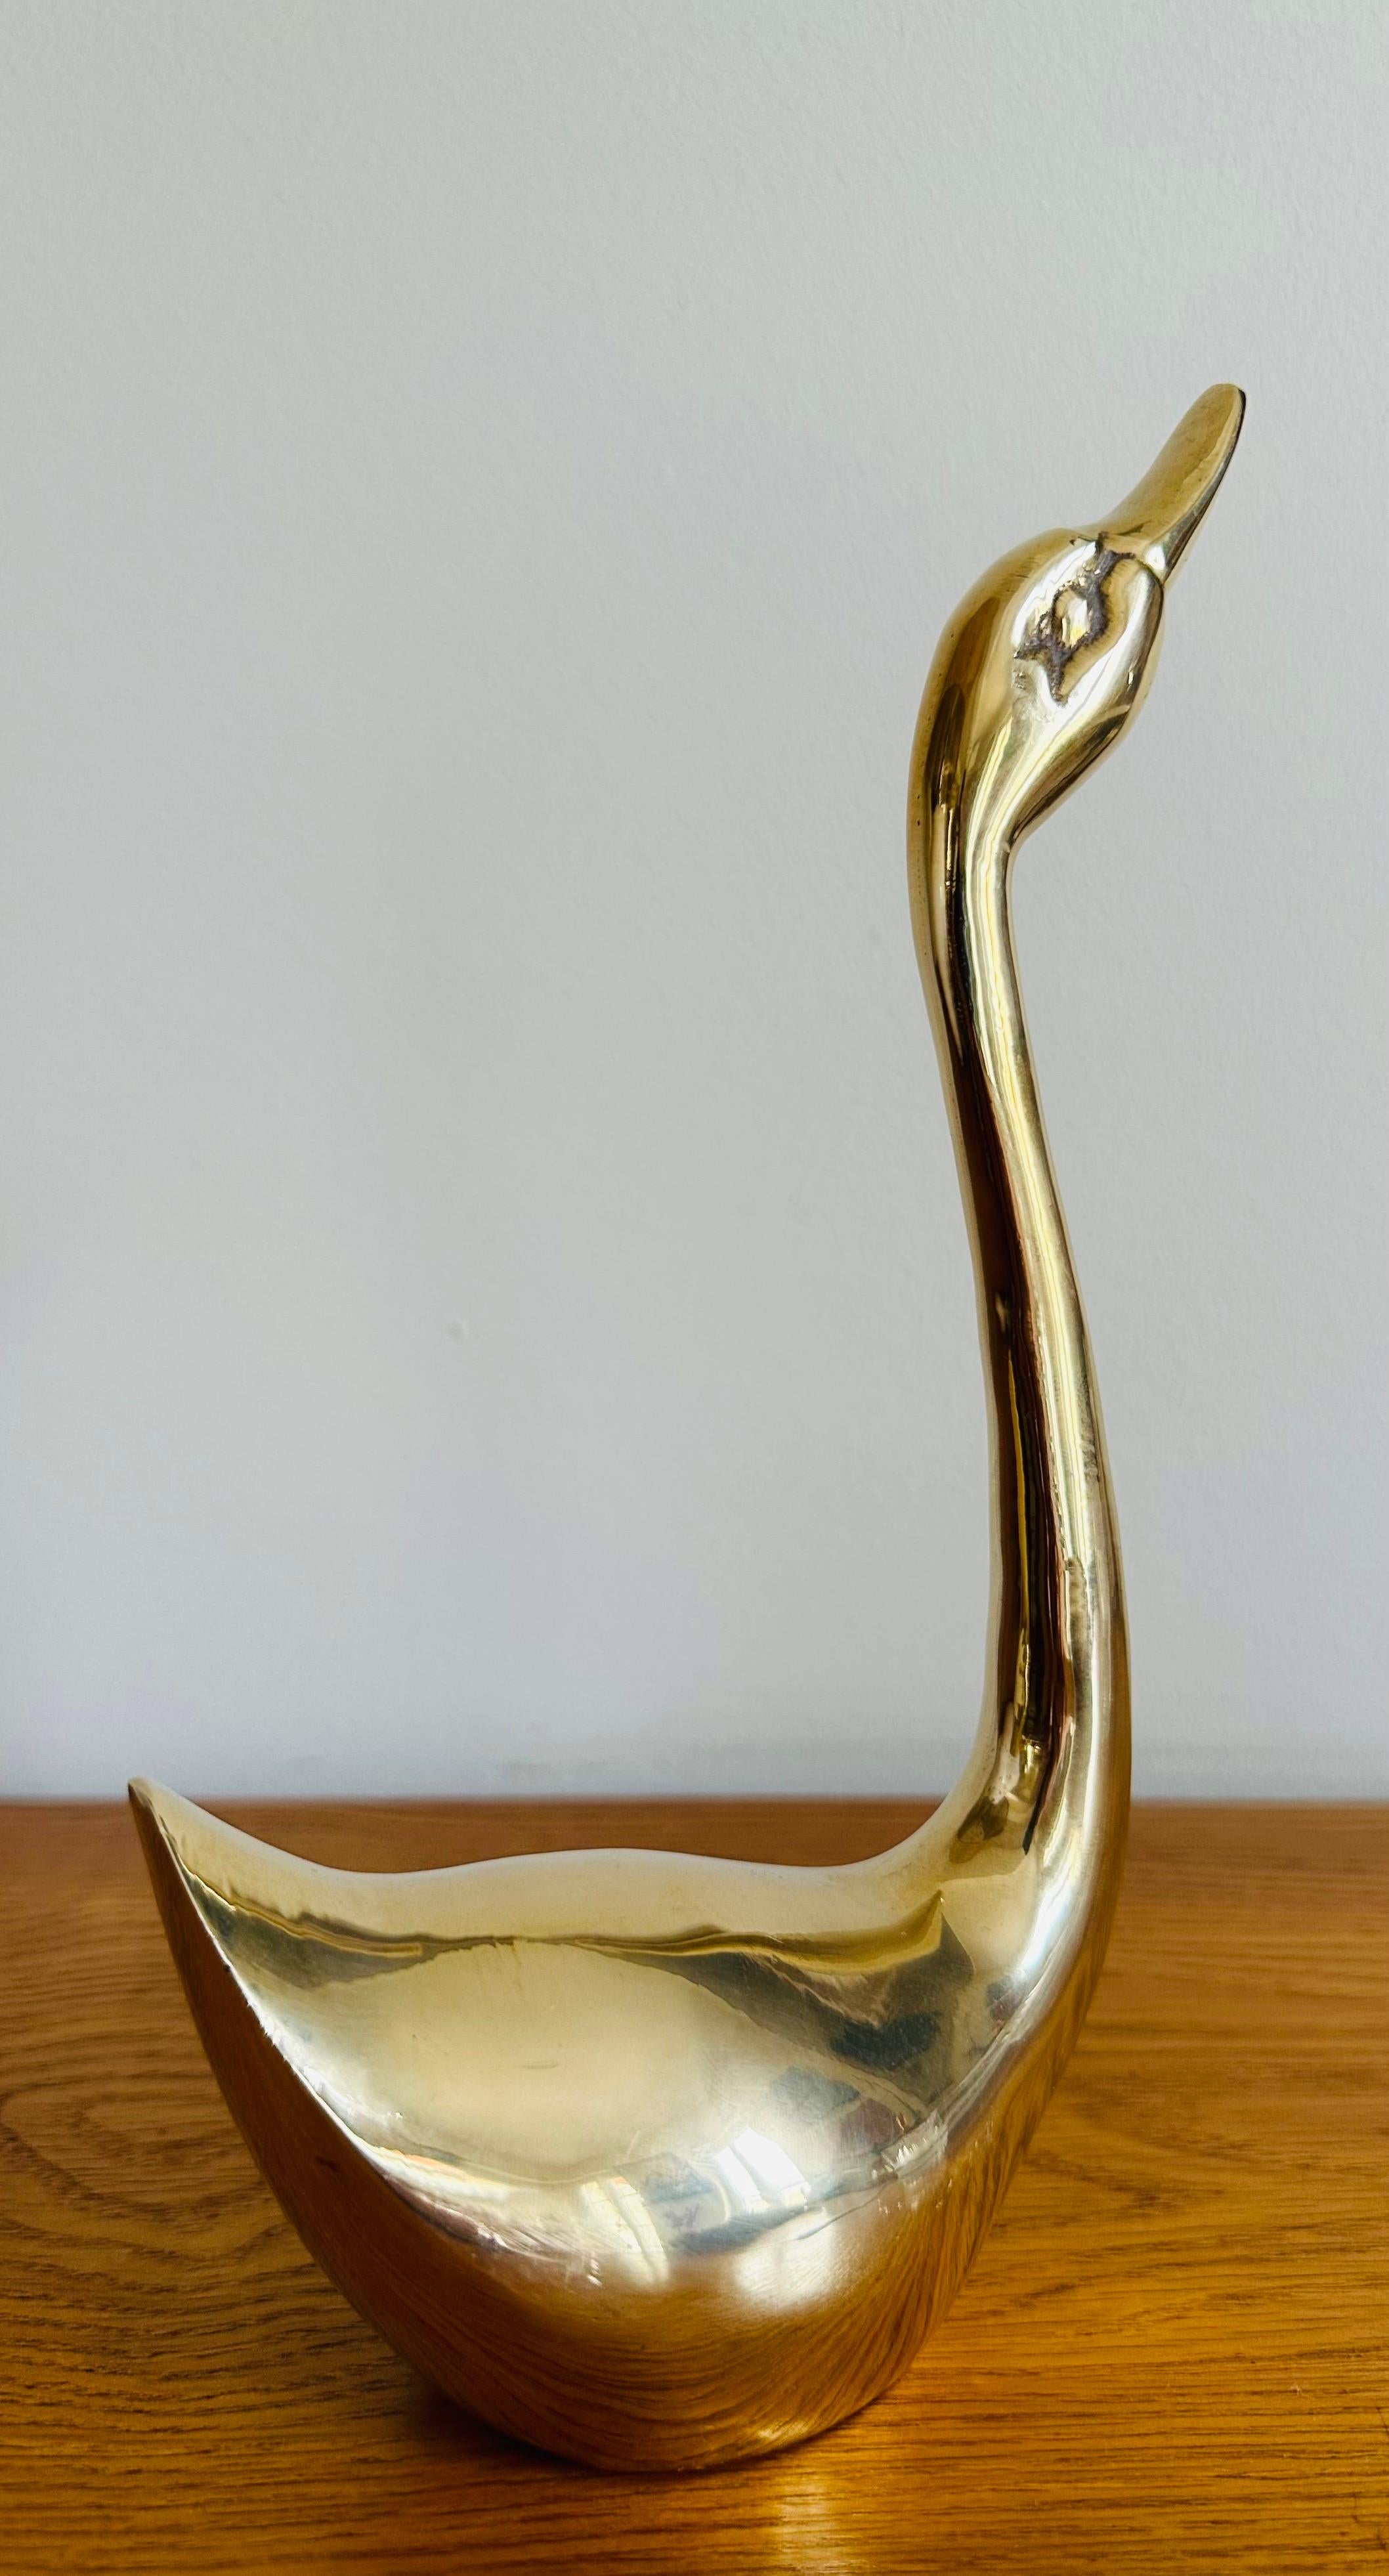 Vintage 1970s French Polished Brass Elegant Decorative Swan Paperweight 3